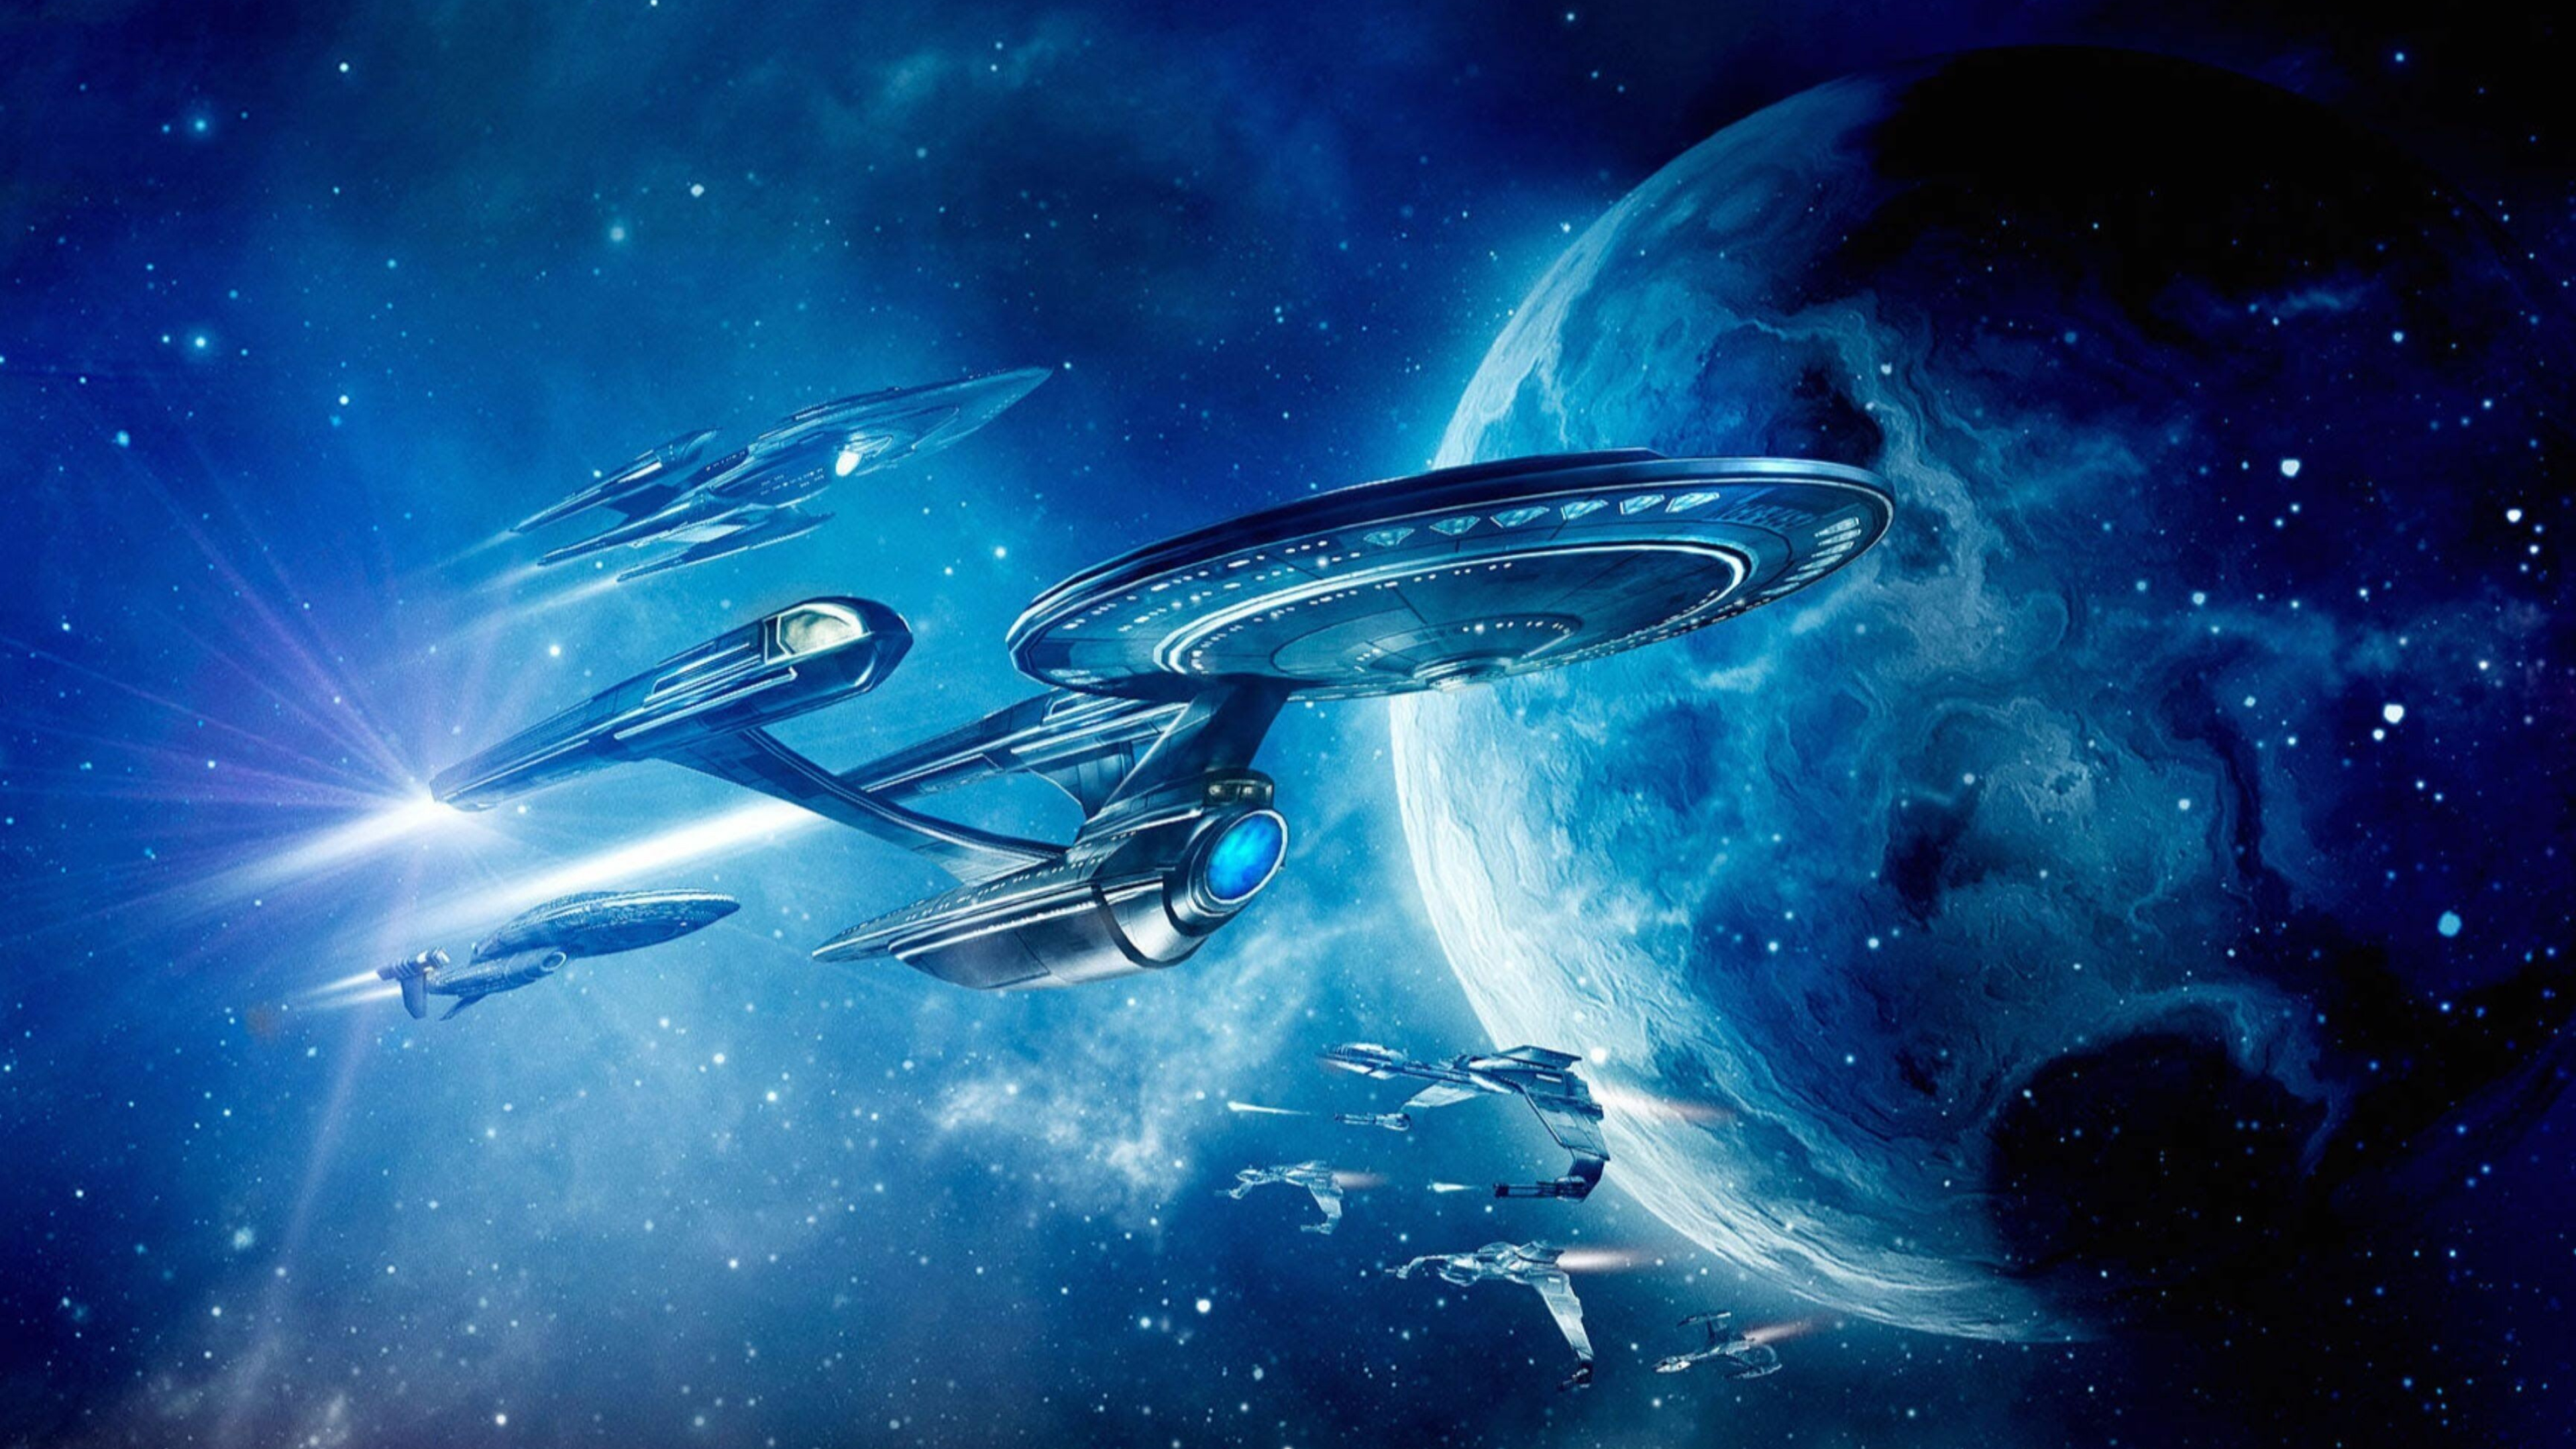 Star Trek: An American media franchise based on the science fiction television series created by Gene Roddenberry. 3840x2160 4K Wallpaper.